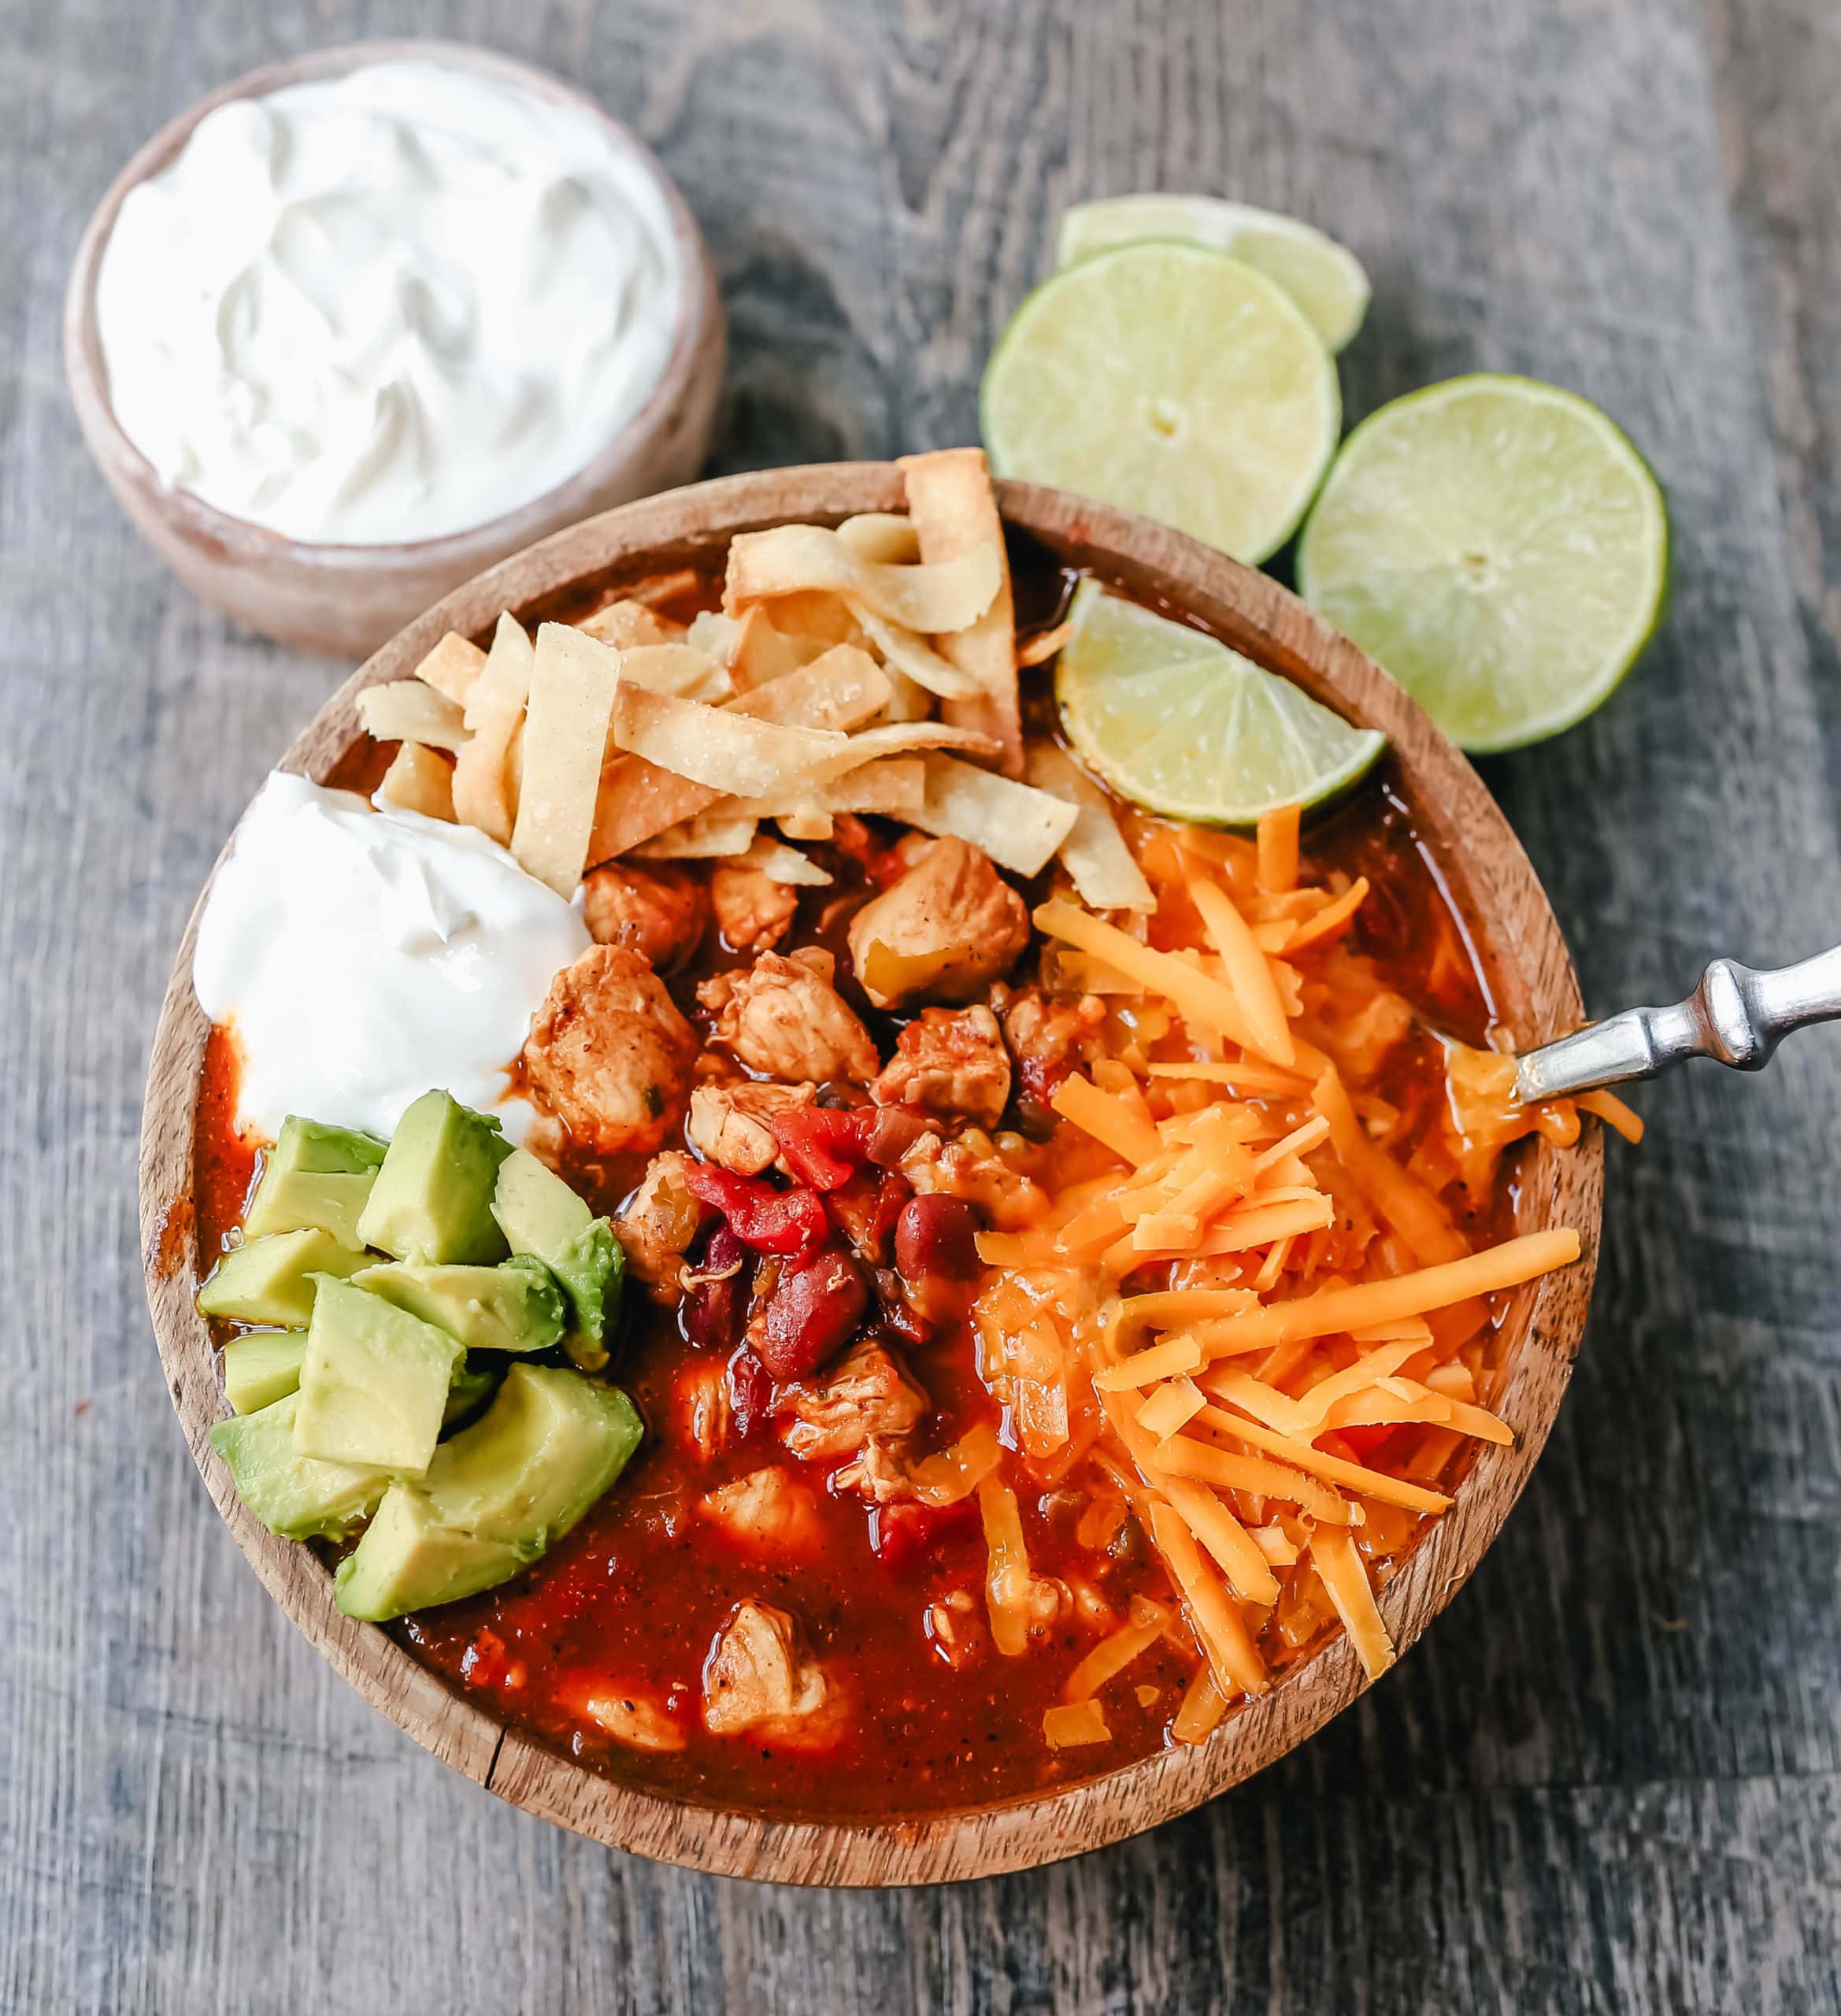 Chicken Chili. Traditional, homemade chicken chili with Mexican spices, green chilies, tomatoes, chili beans, and two secret ingredients to put it over the top! www.modernhoney.com #chili #chickenchili